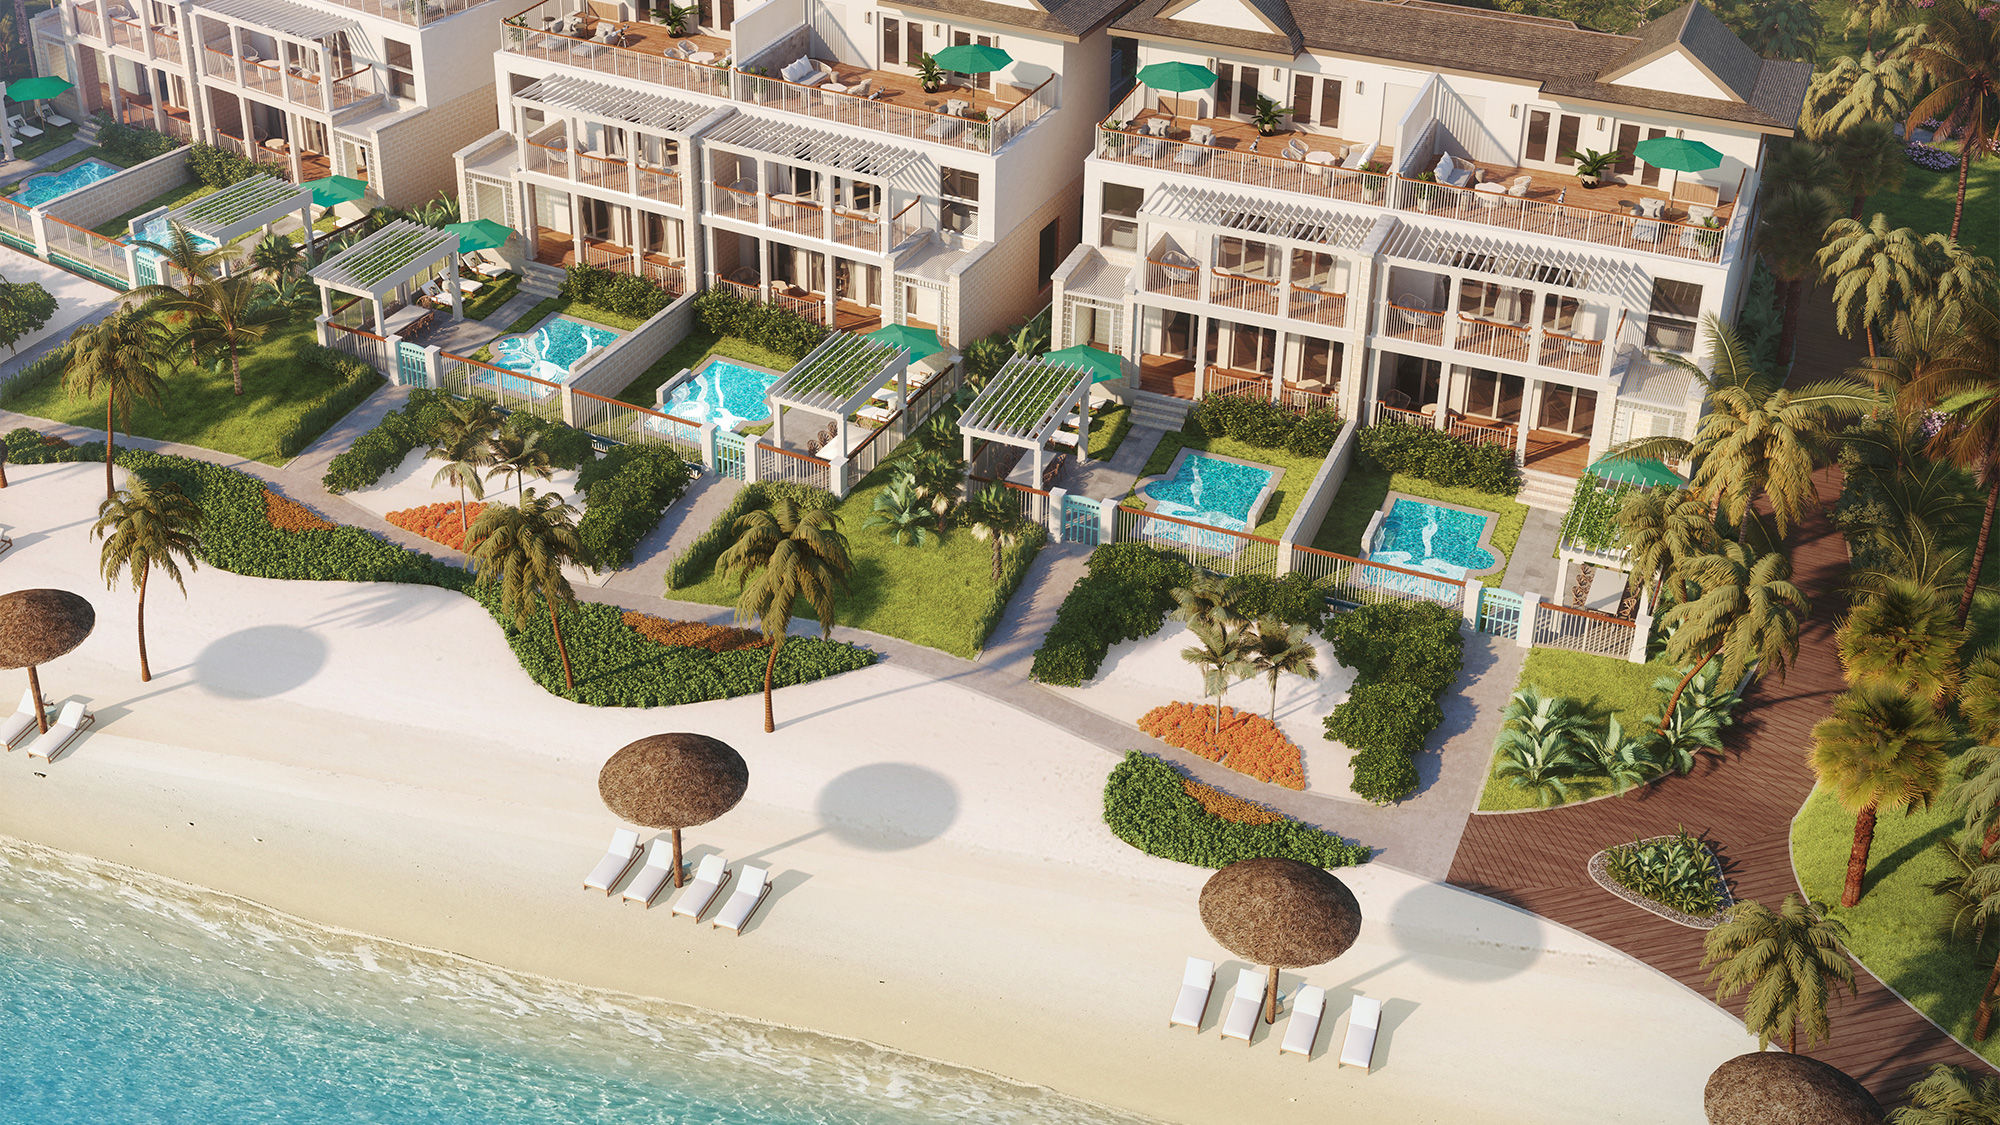 Three-story Firesky Reserve Villas will feature private plunge pools and rooftop decks.